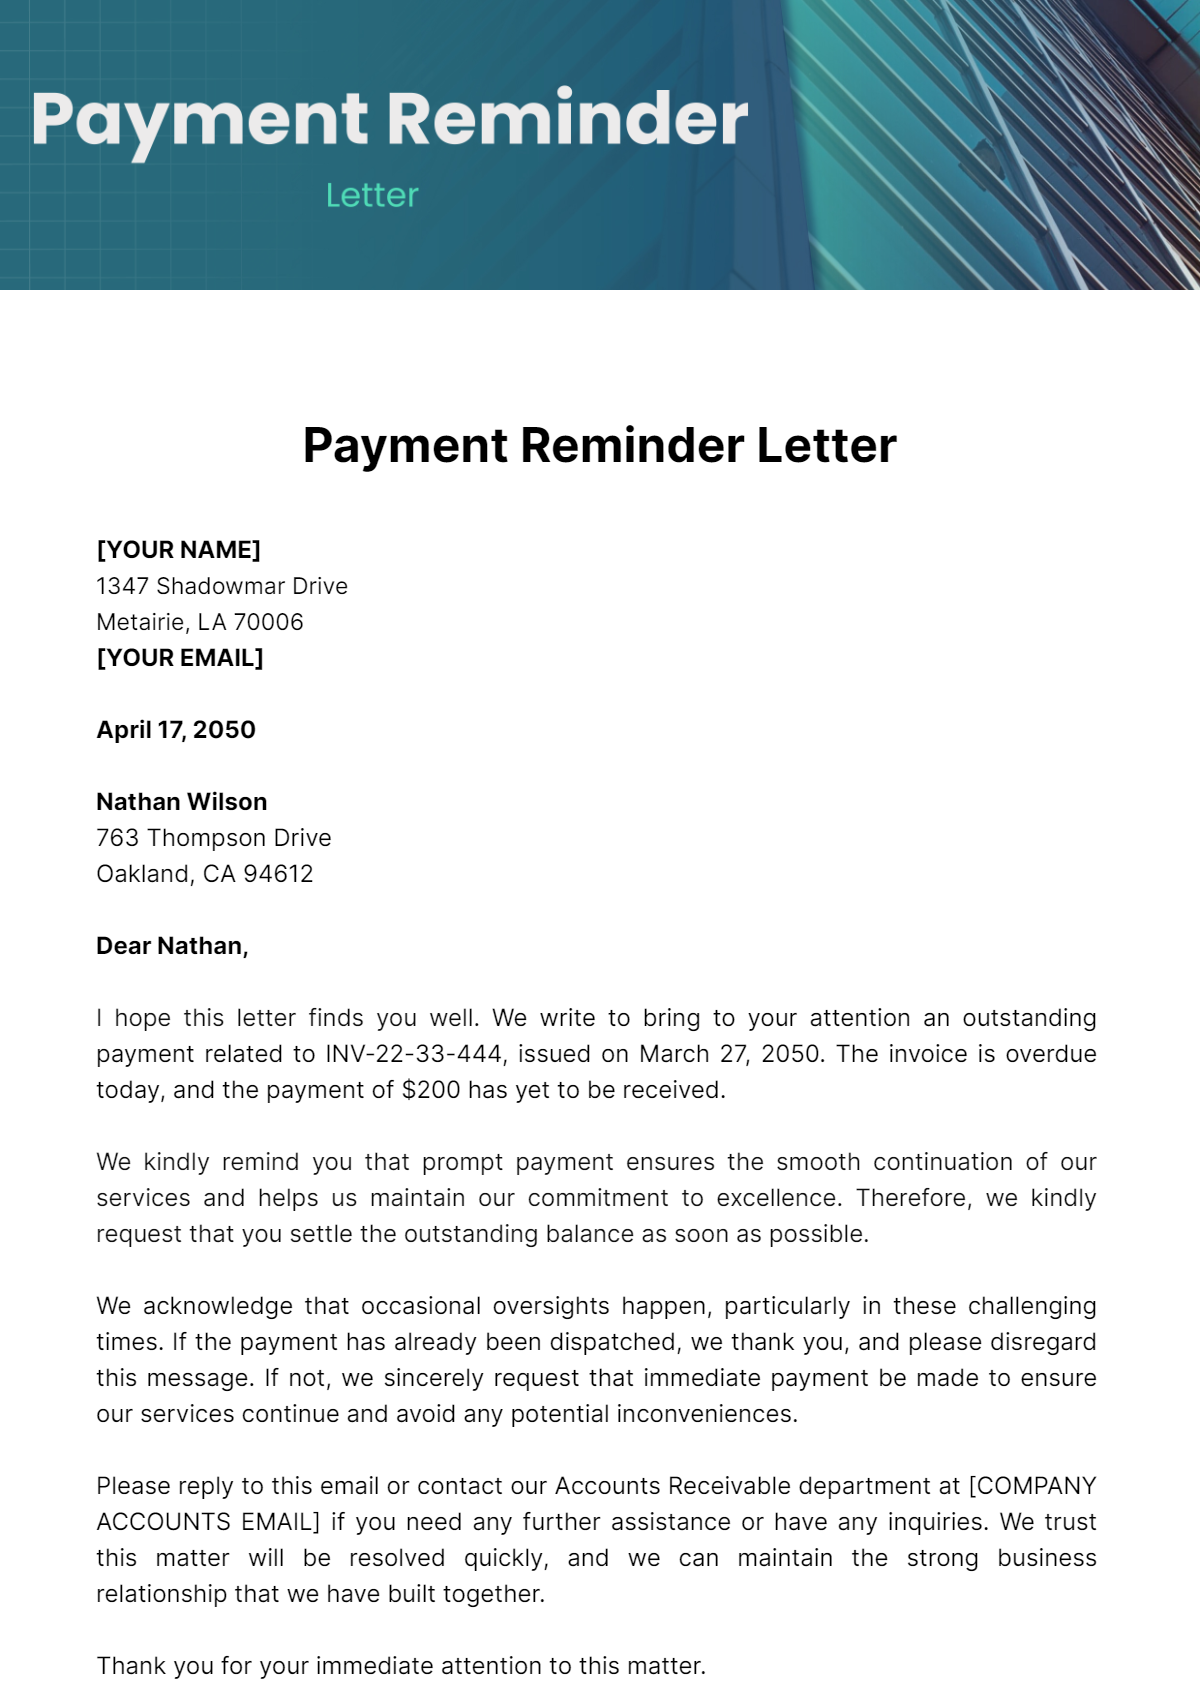 Free Payment Reminder Letter Template